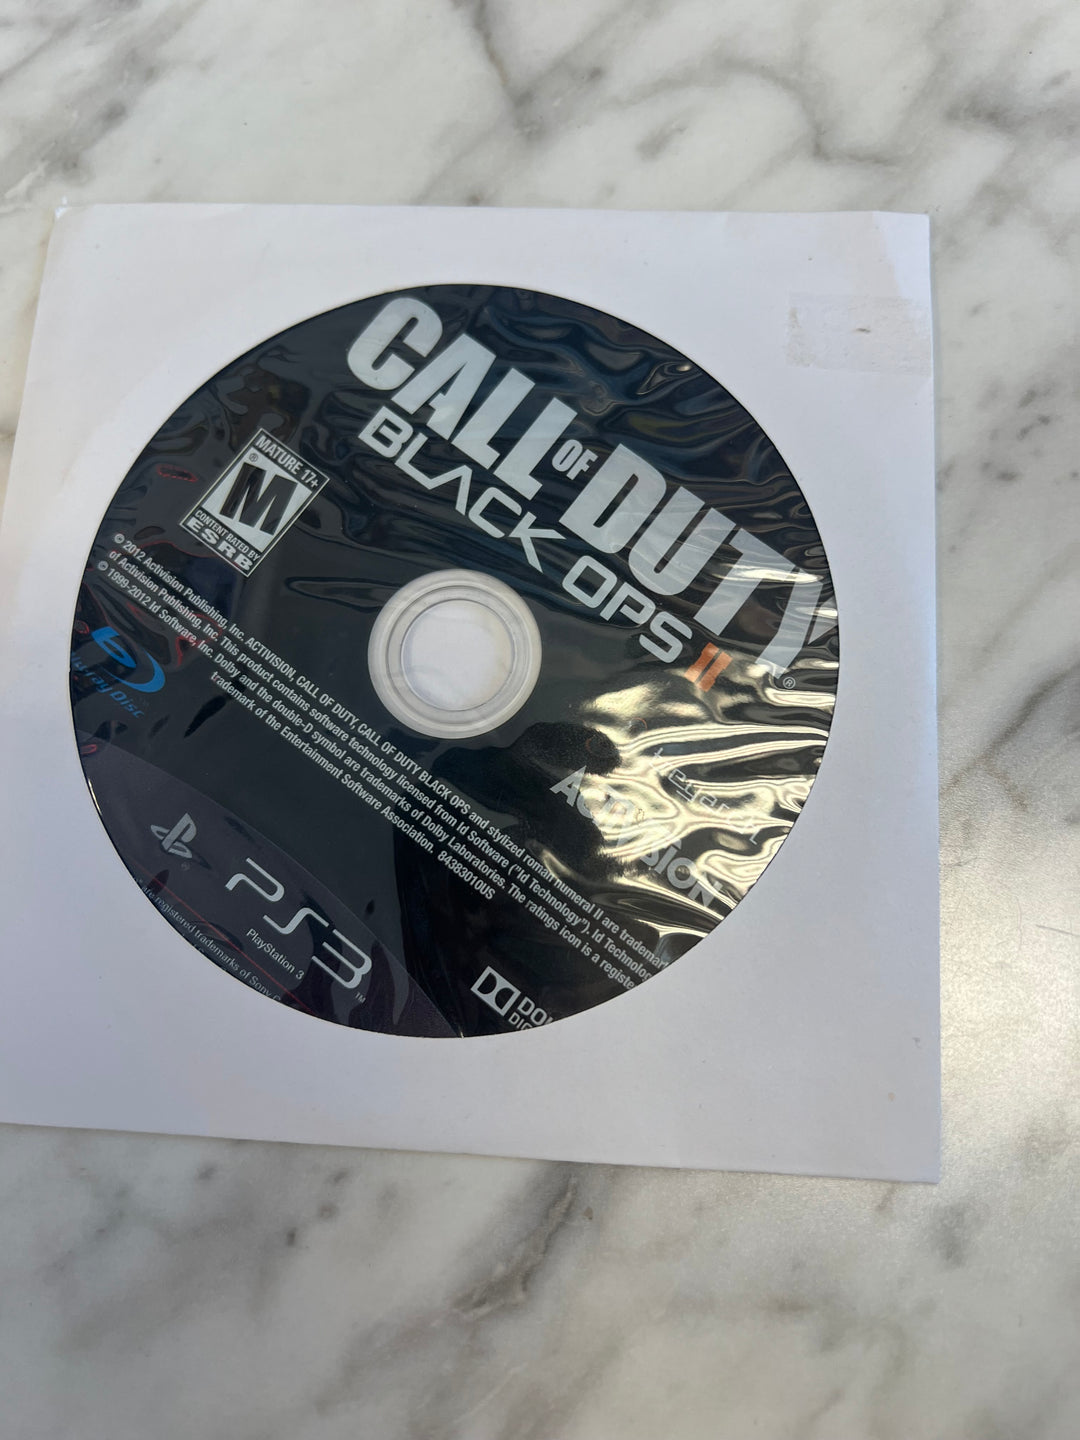 Call of Duty Black Ops II 2 for PS3 Playstation 3 Disc Only No Case/Manual DU62724